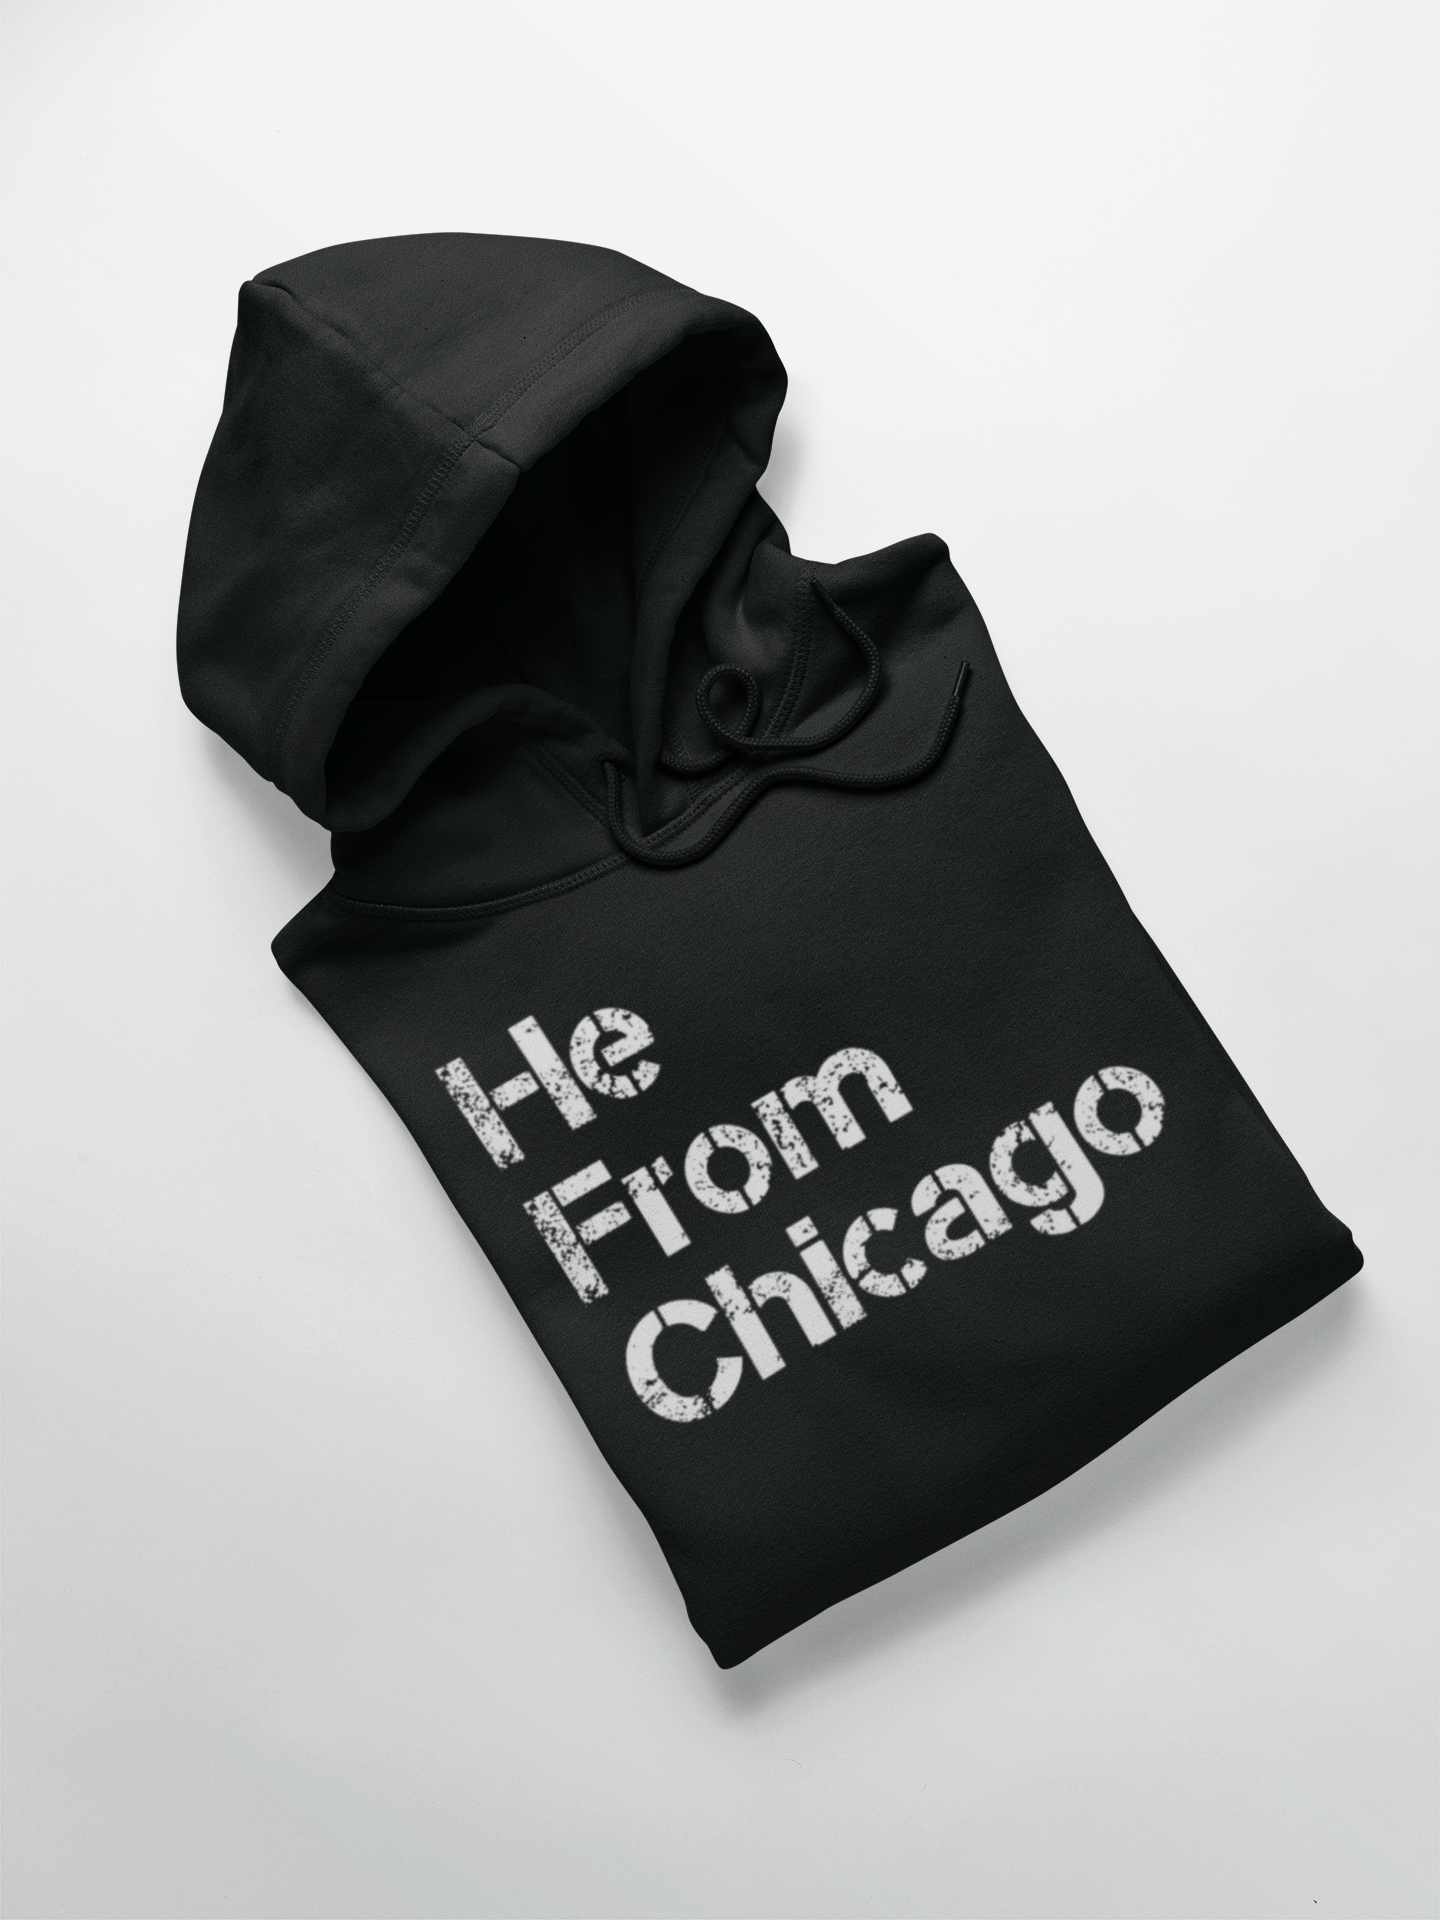 He From Chicago Hoodie